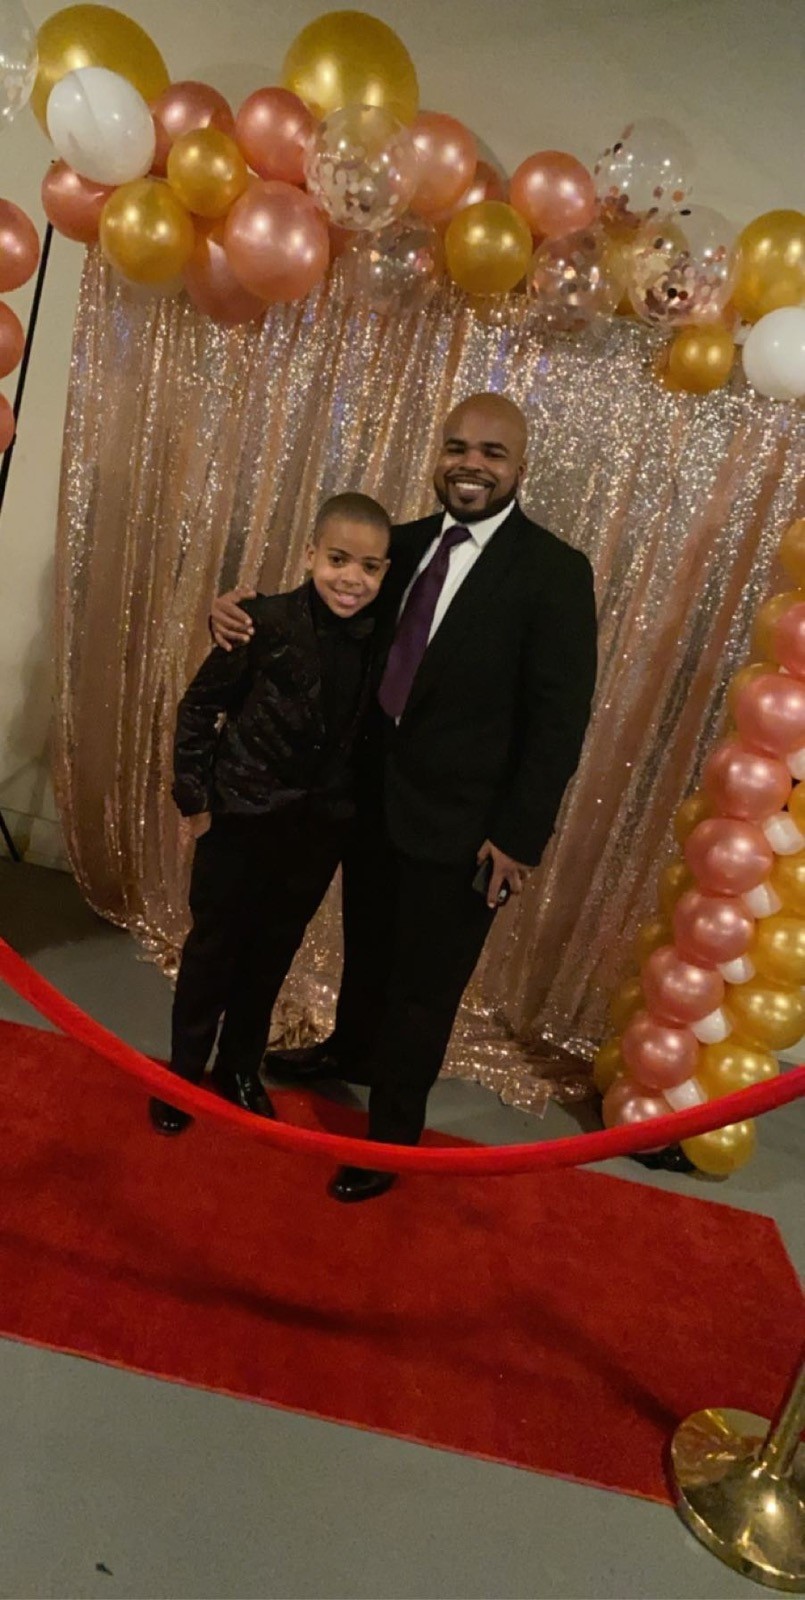 Ja’Shar Hartley in Suit with Son